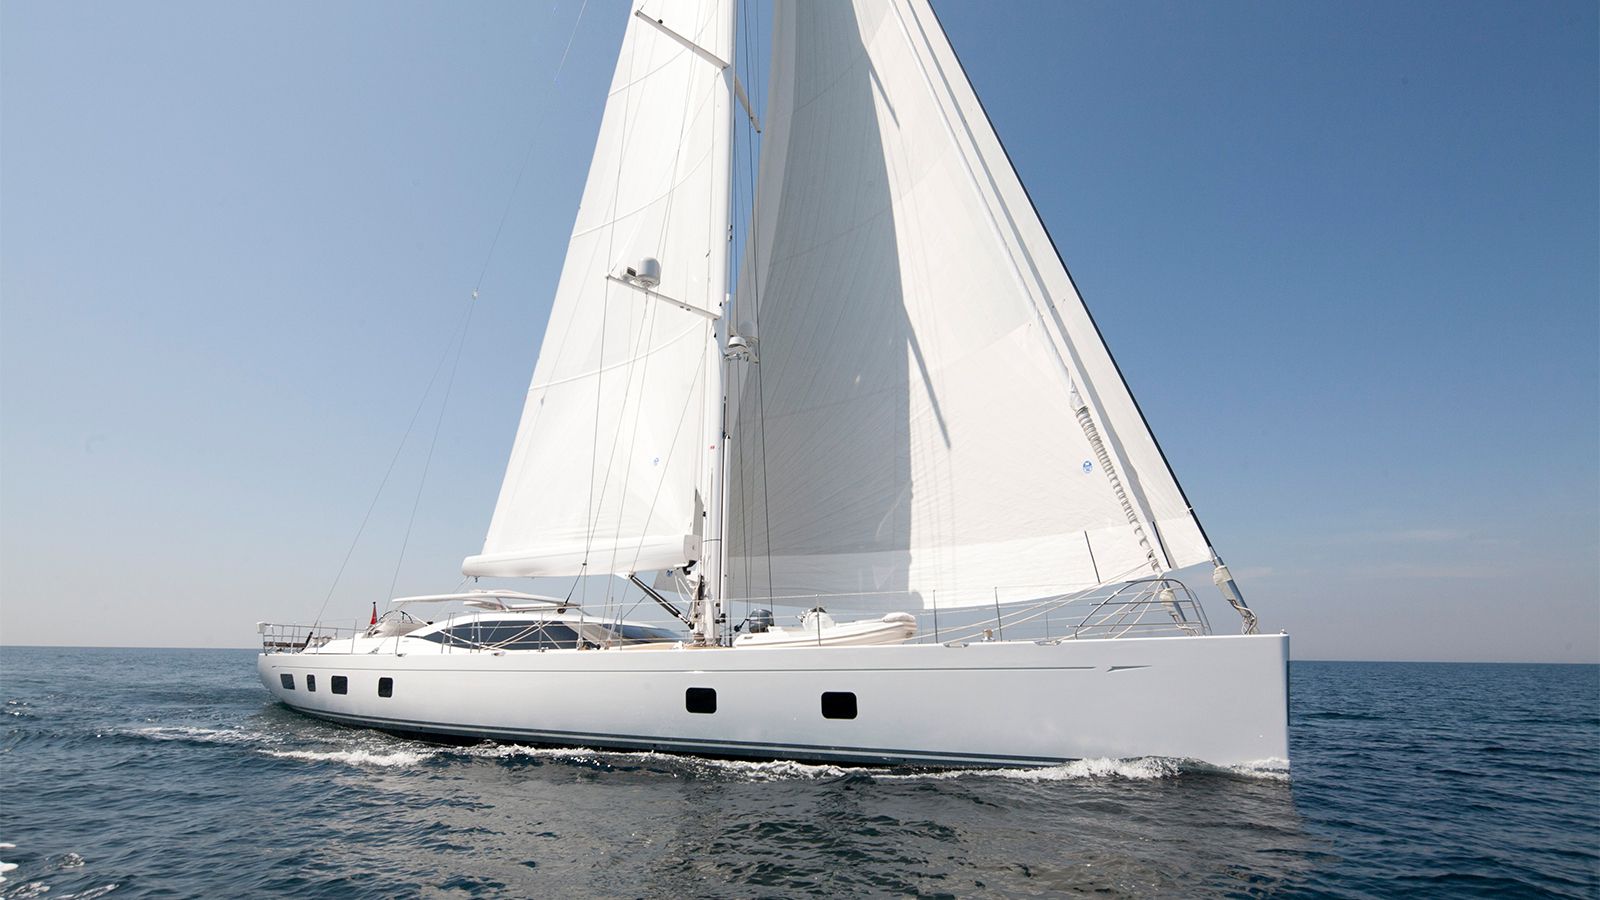 101' 1''/30.8m Oyster Yachts SERAFIM for sale with IYC